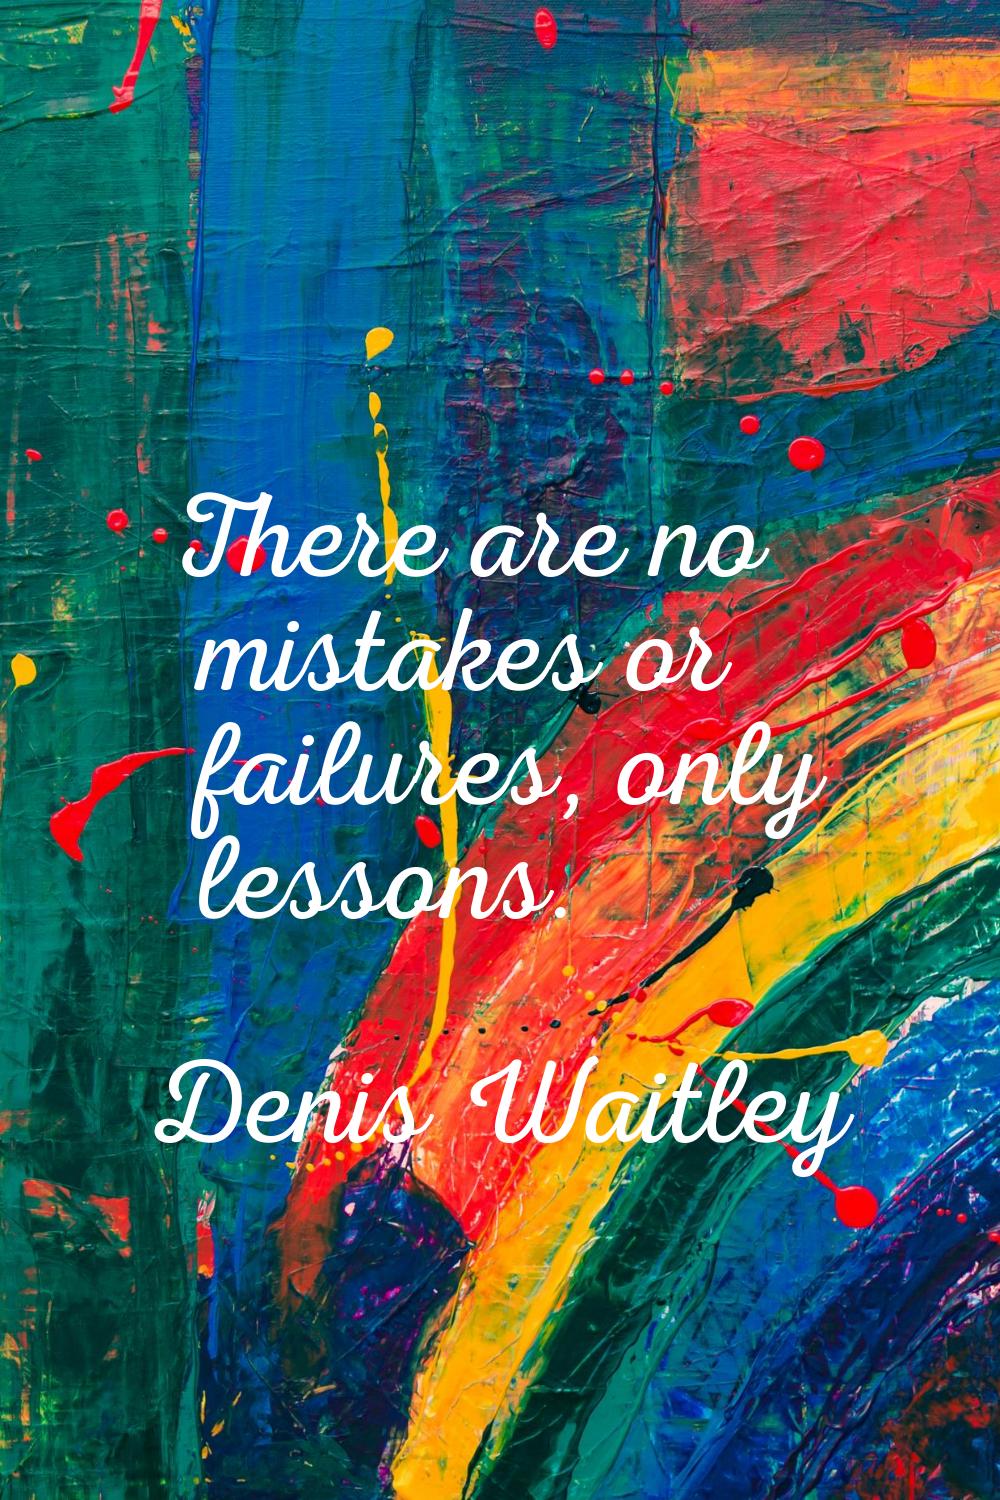 There are no mistakes or failures, only lessons.